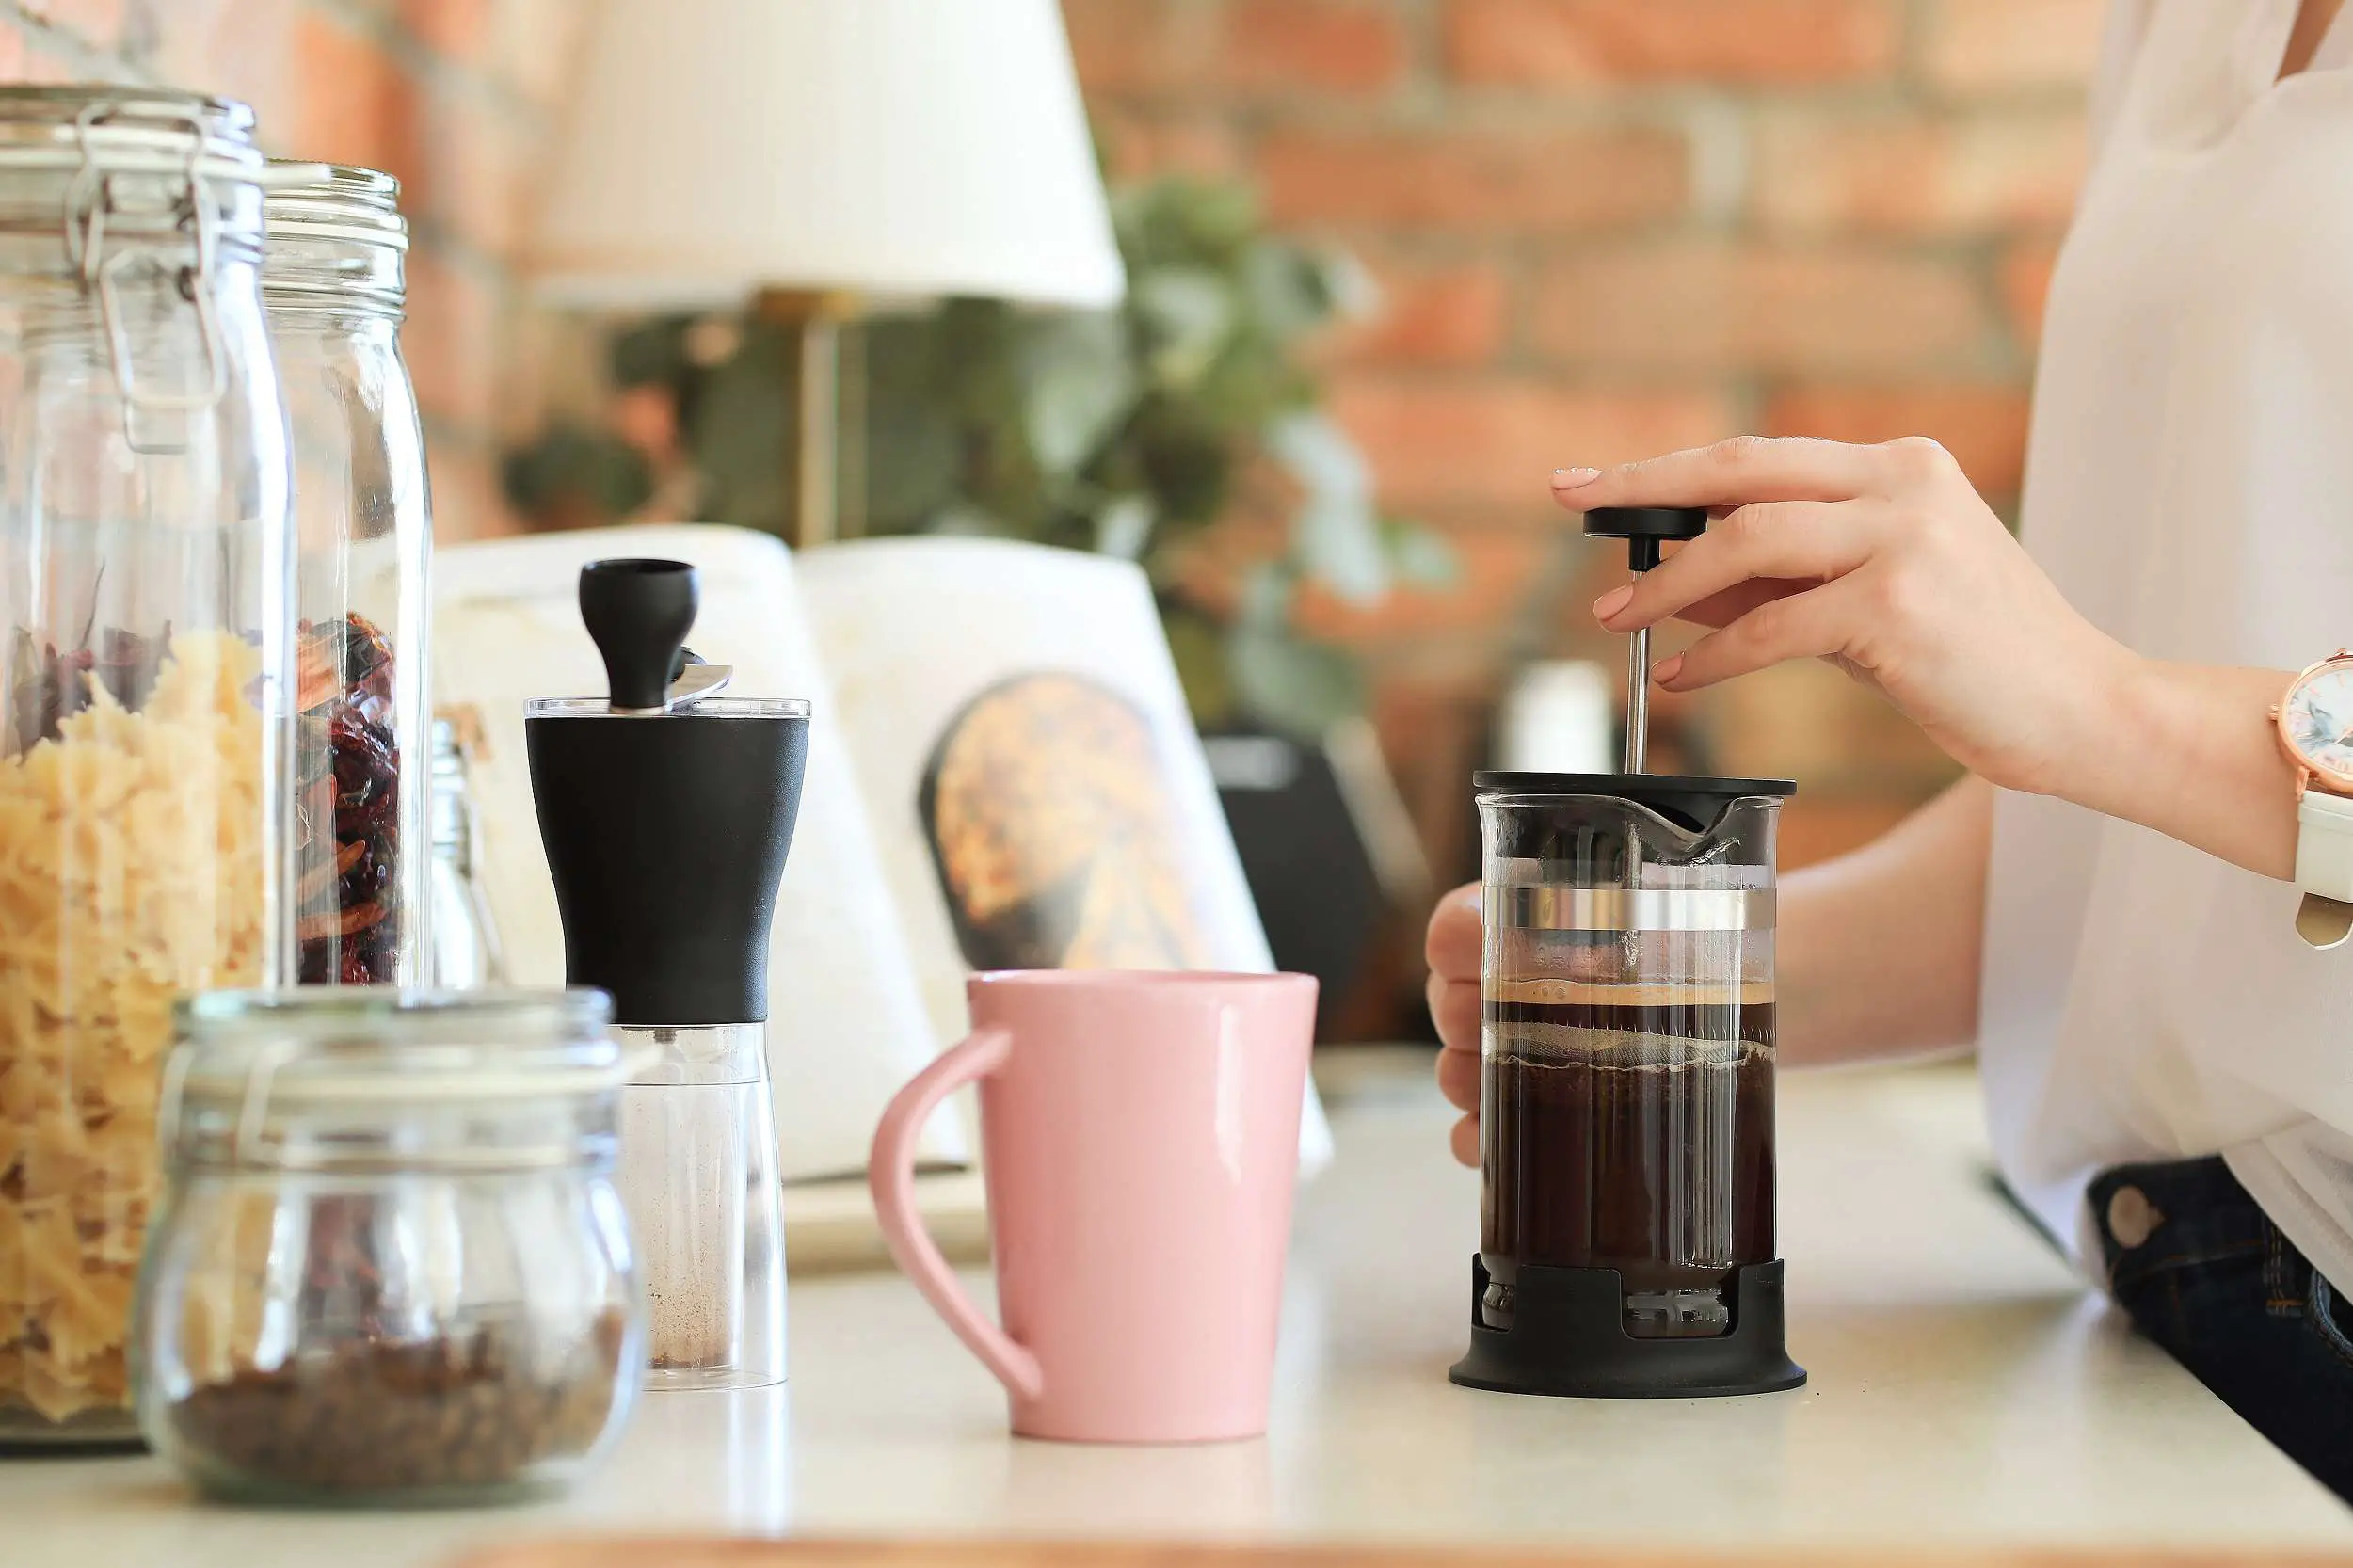 How much Coffee in a French Press should I use to make the Best Coffee?